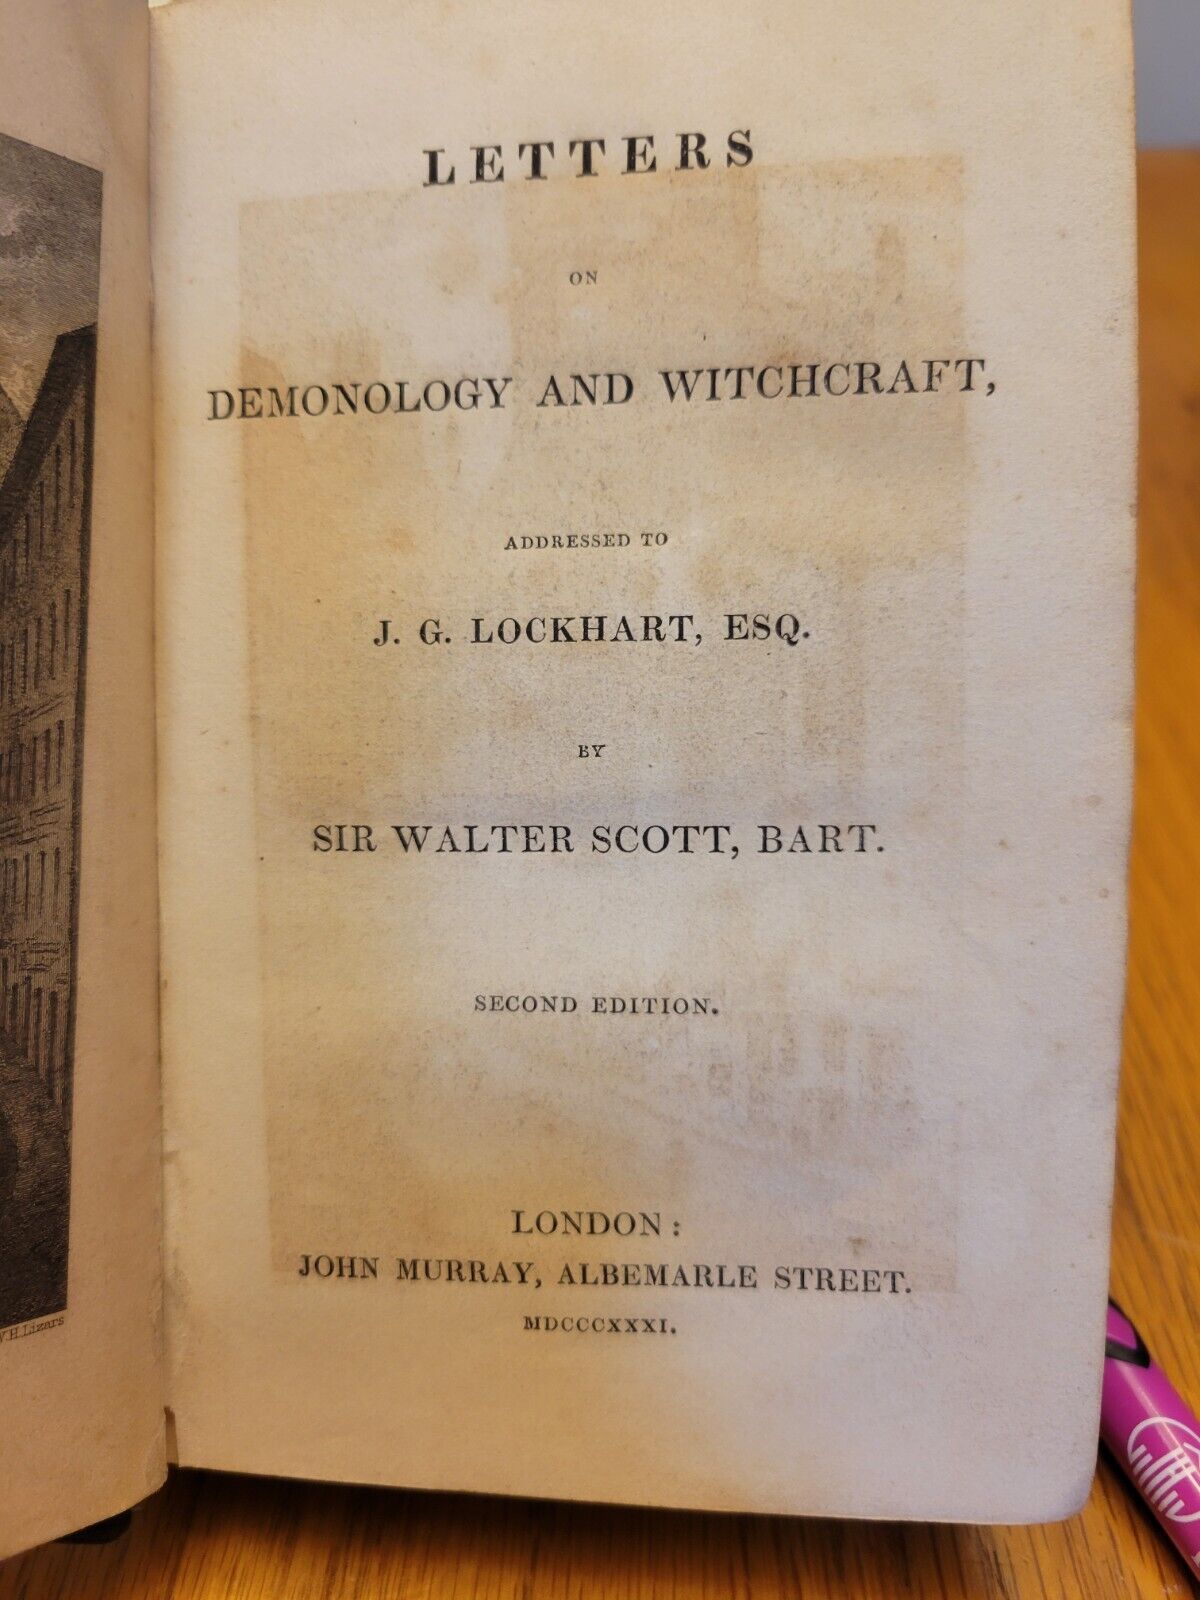 1831, Second edition, Letters of demonolgy and witchcraft, by Sir Walter Scott.